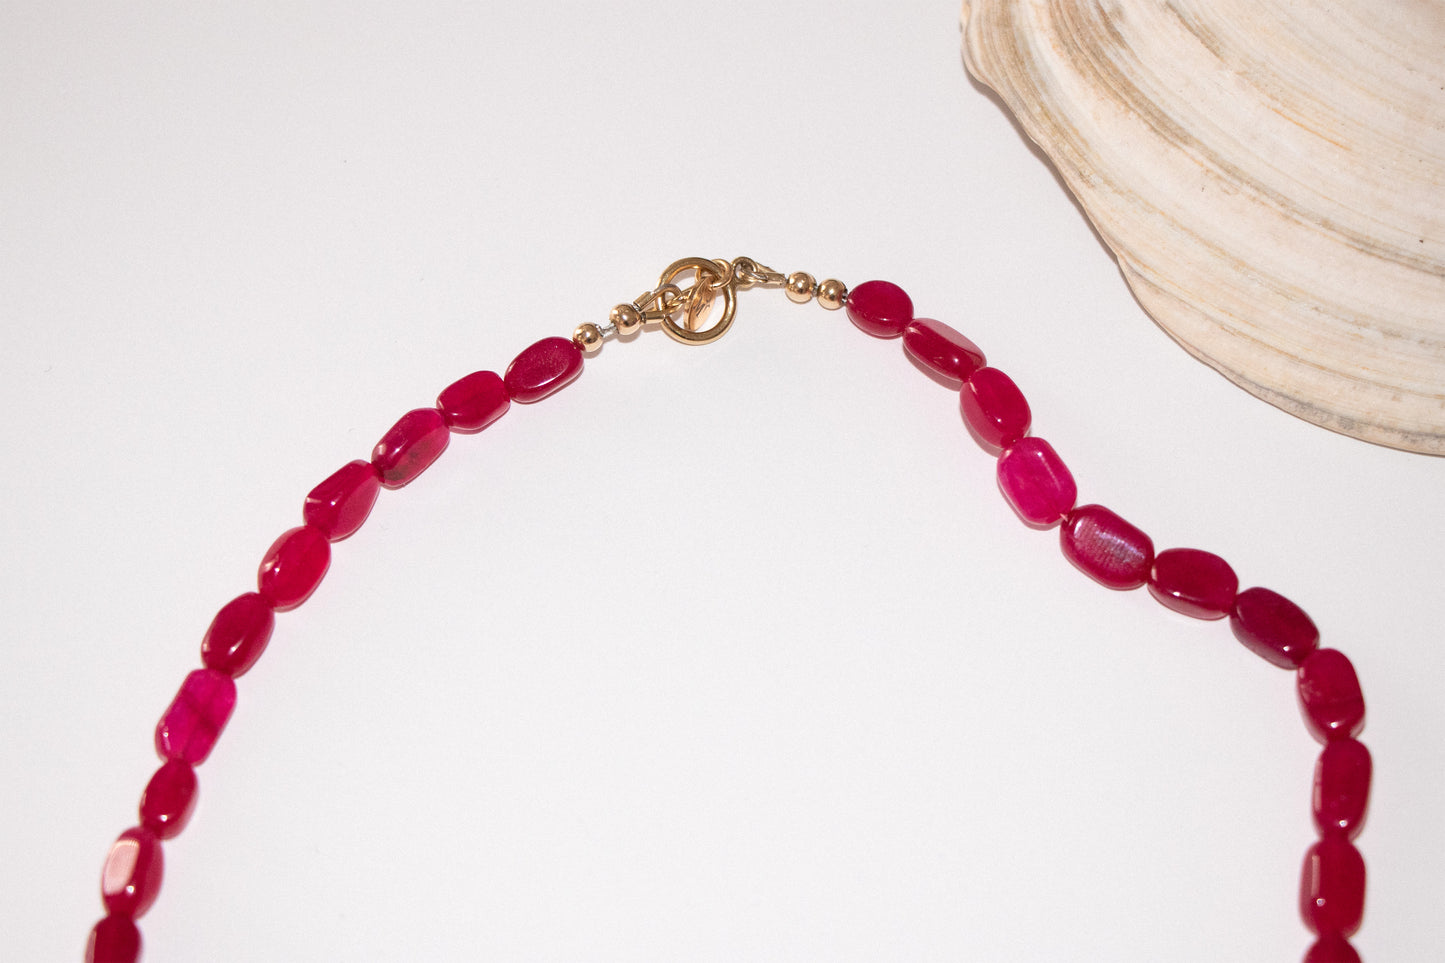 Pink aventurine + coin pearl necklace